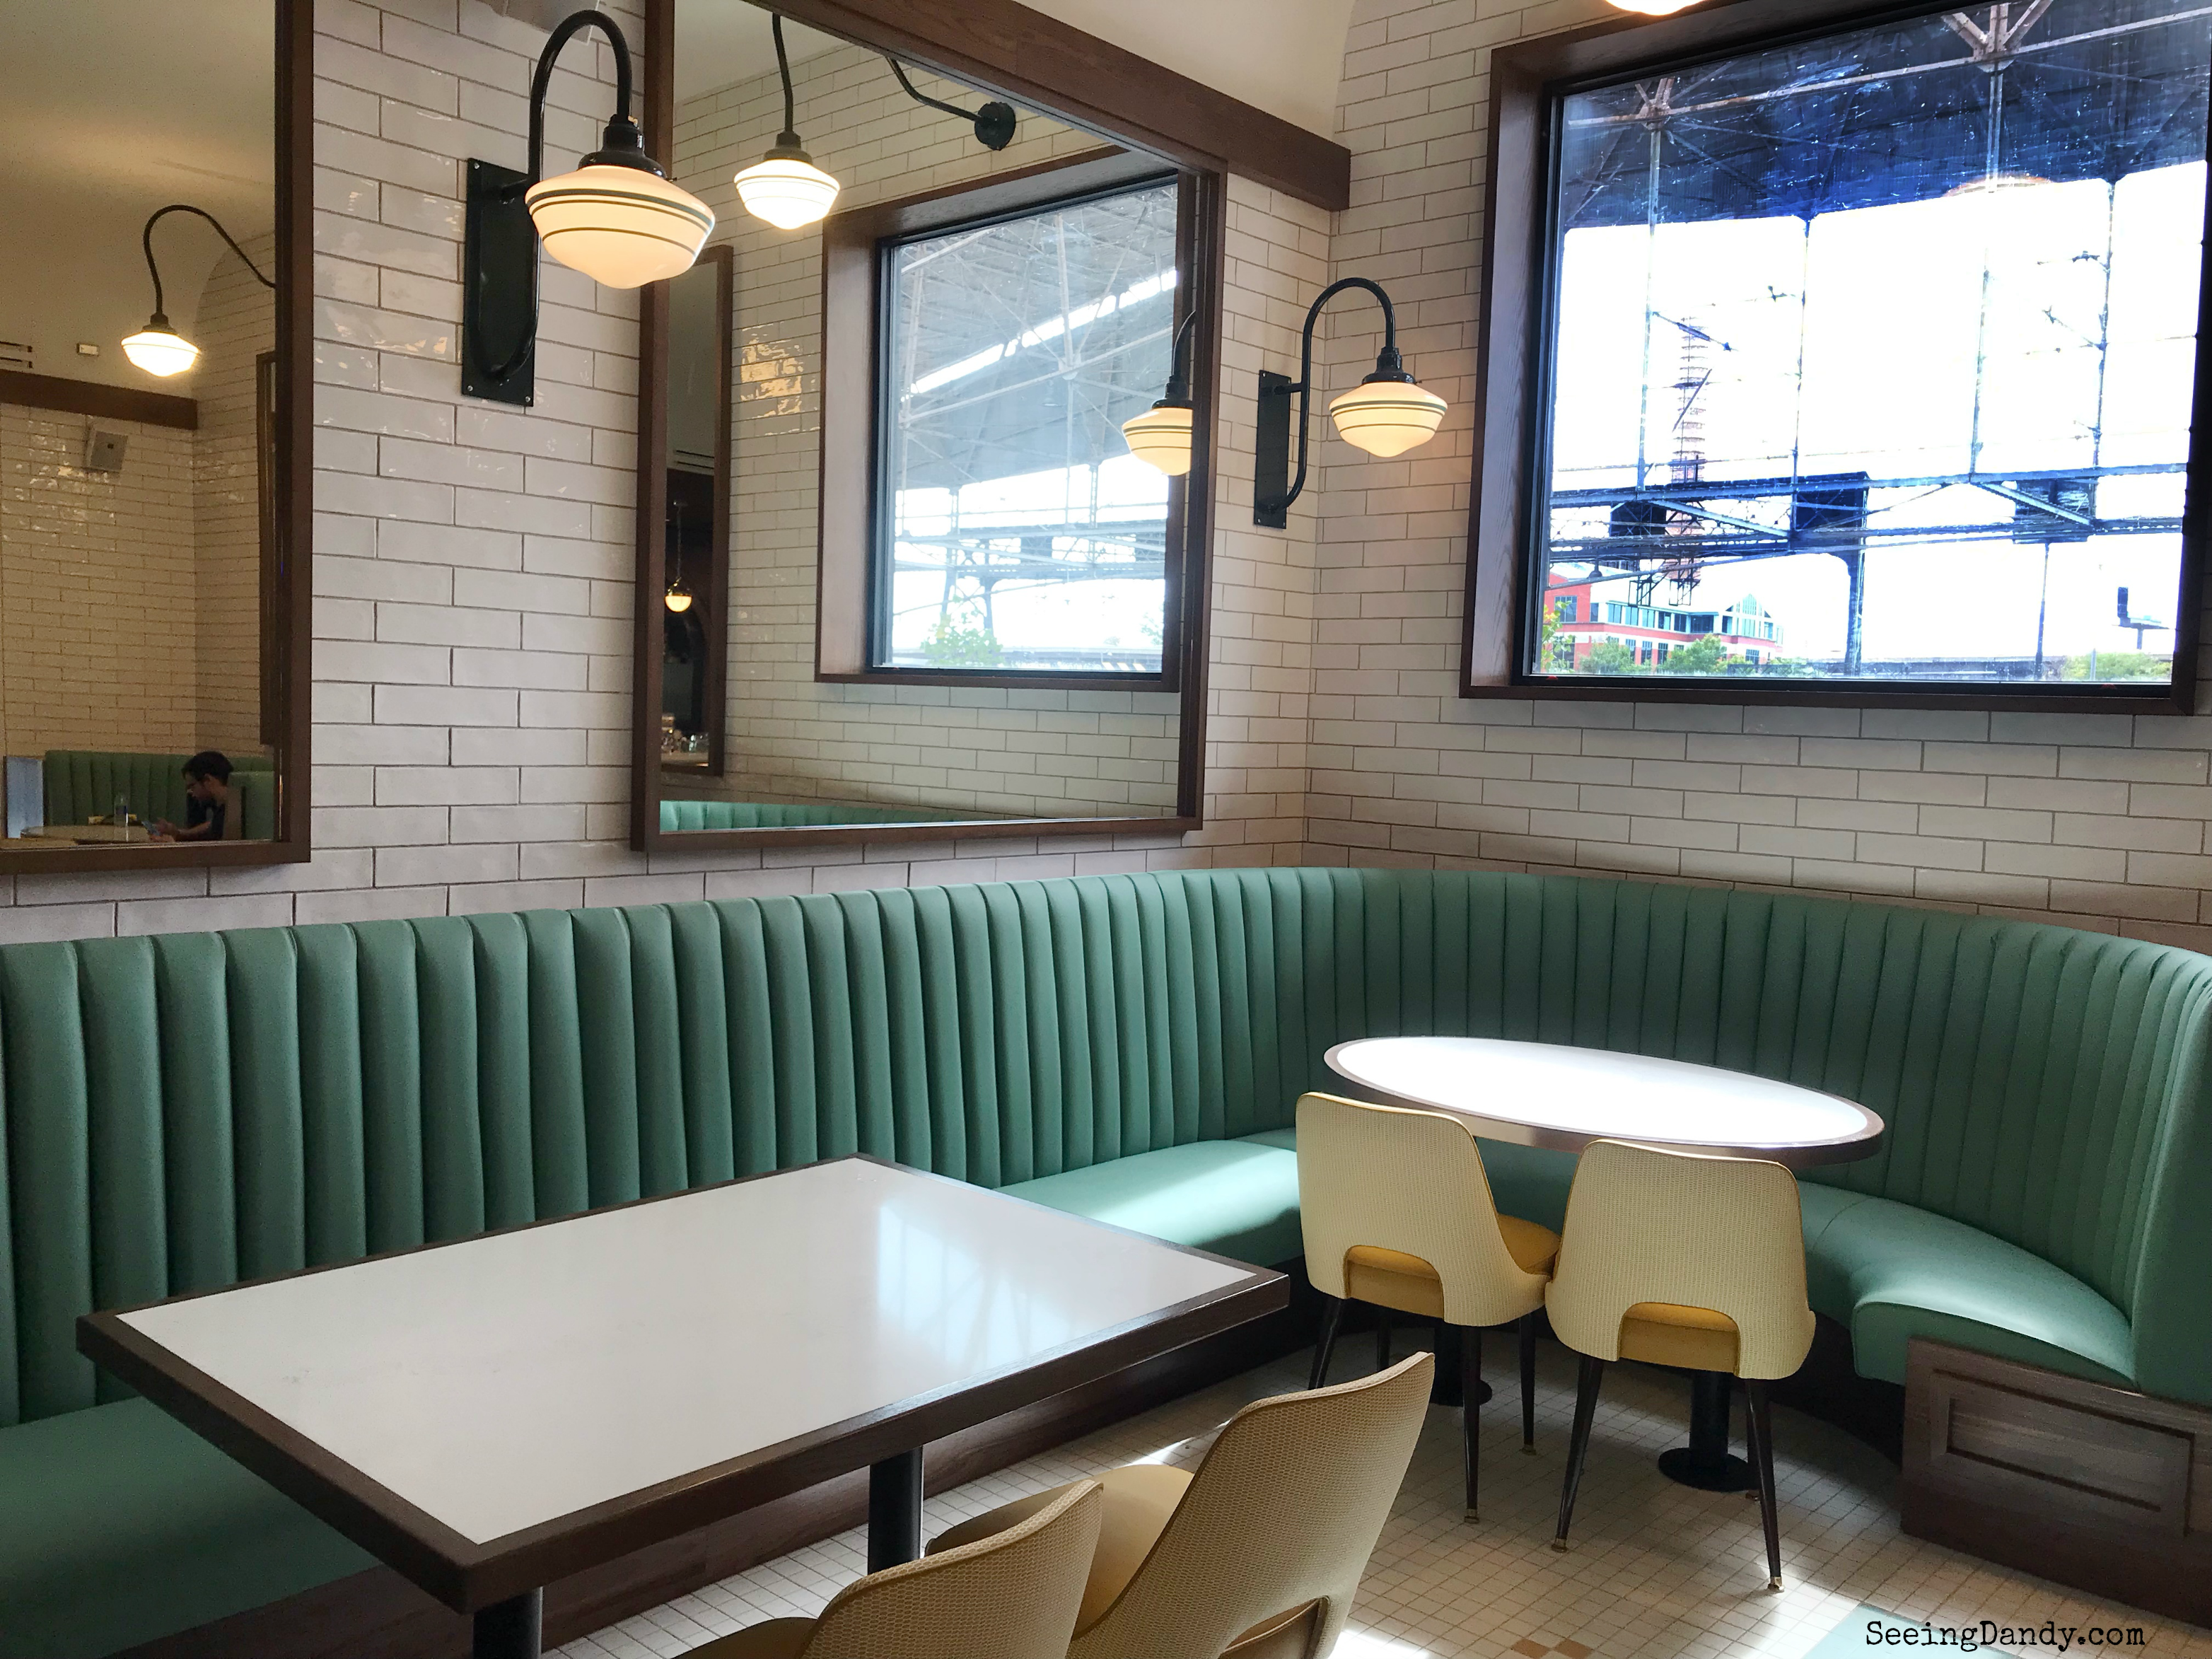 Vintage eating area with mint green booths and retro white subway tile.